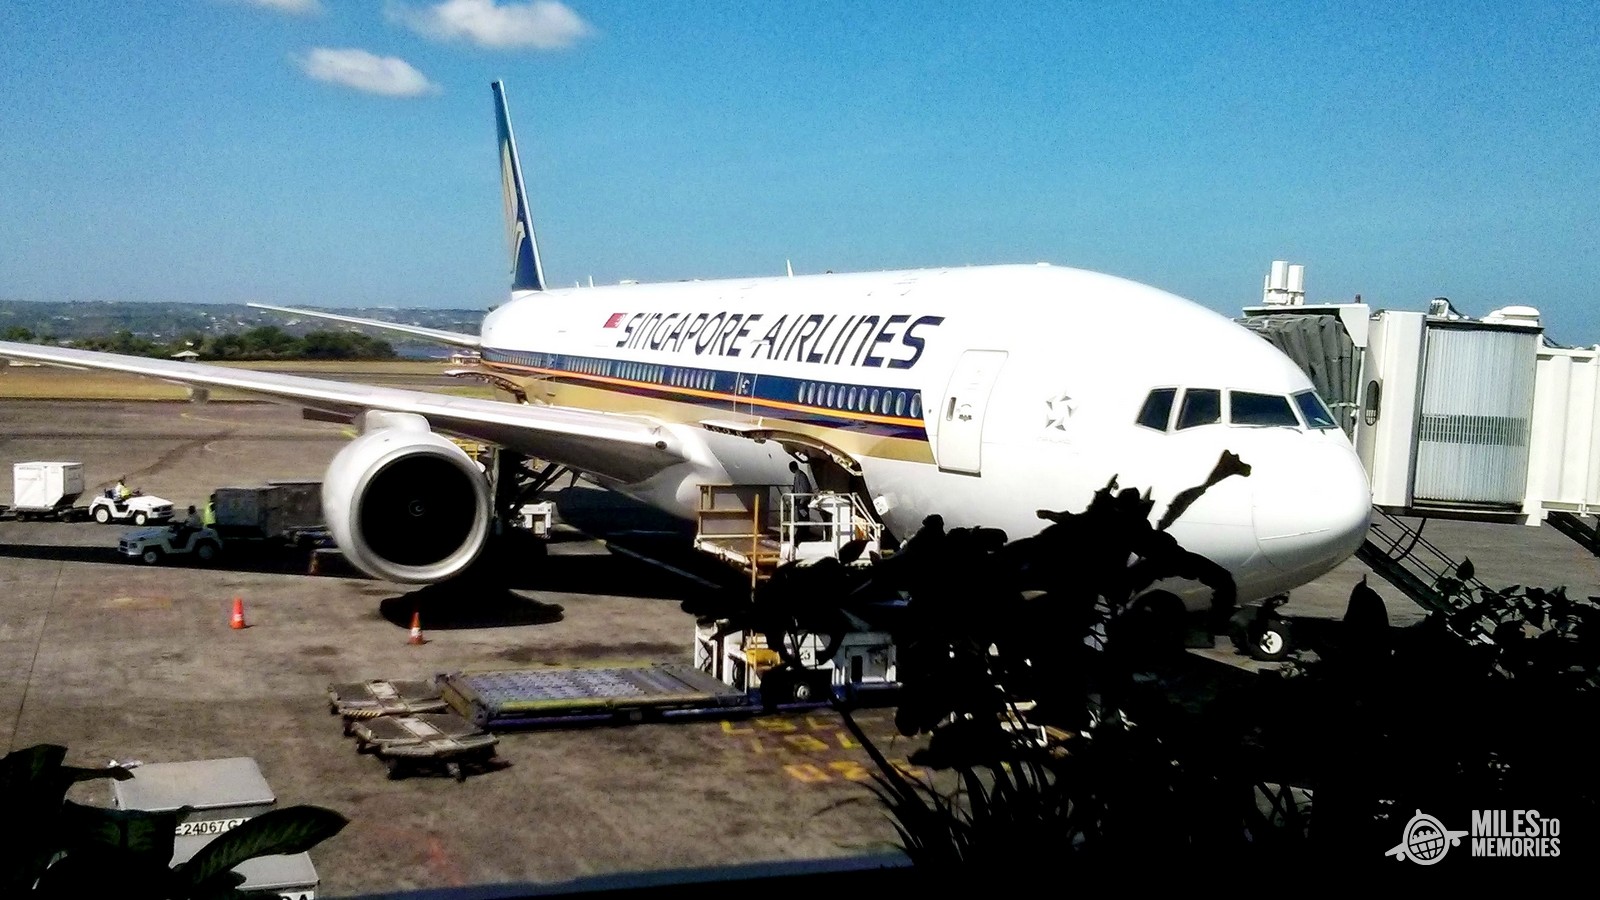 Singapore Airlines Hold Fee is New